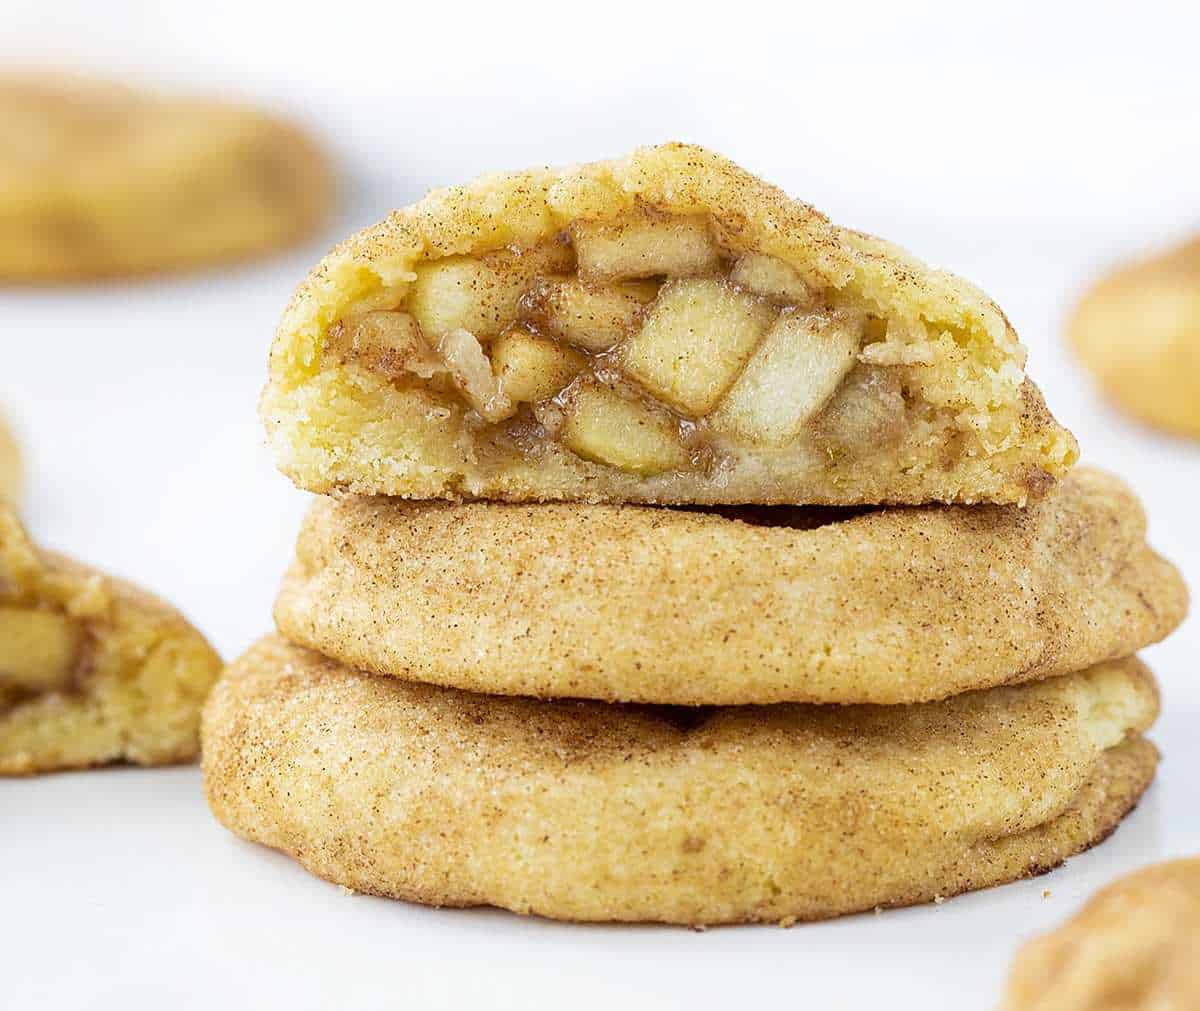 Apple Pie Snickerdoodles Stacked with Top Cut in Half to Show Apple Pie Inside